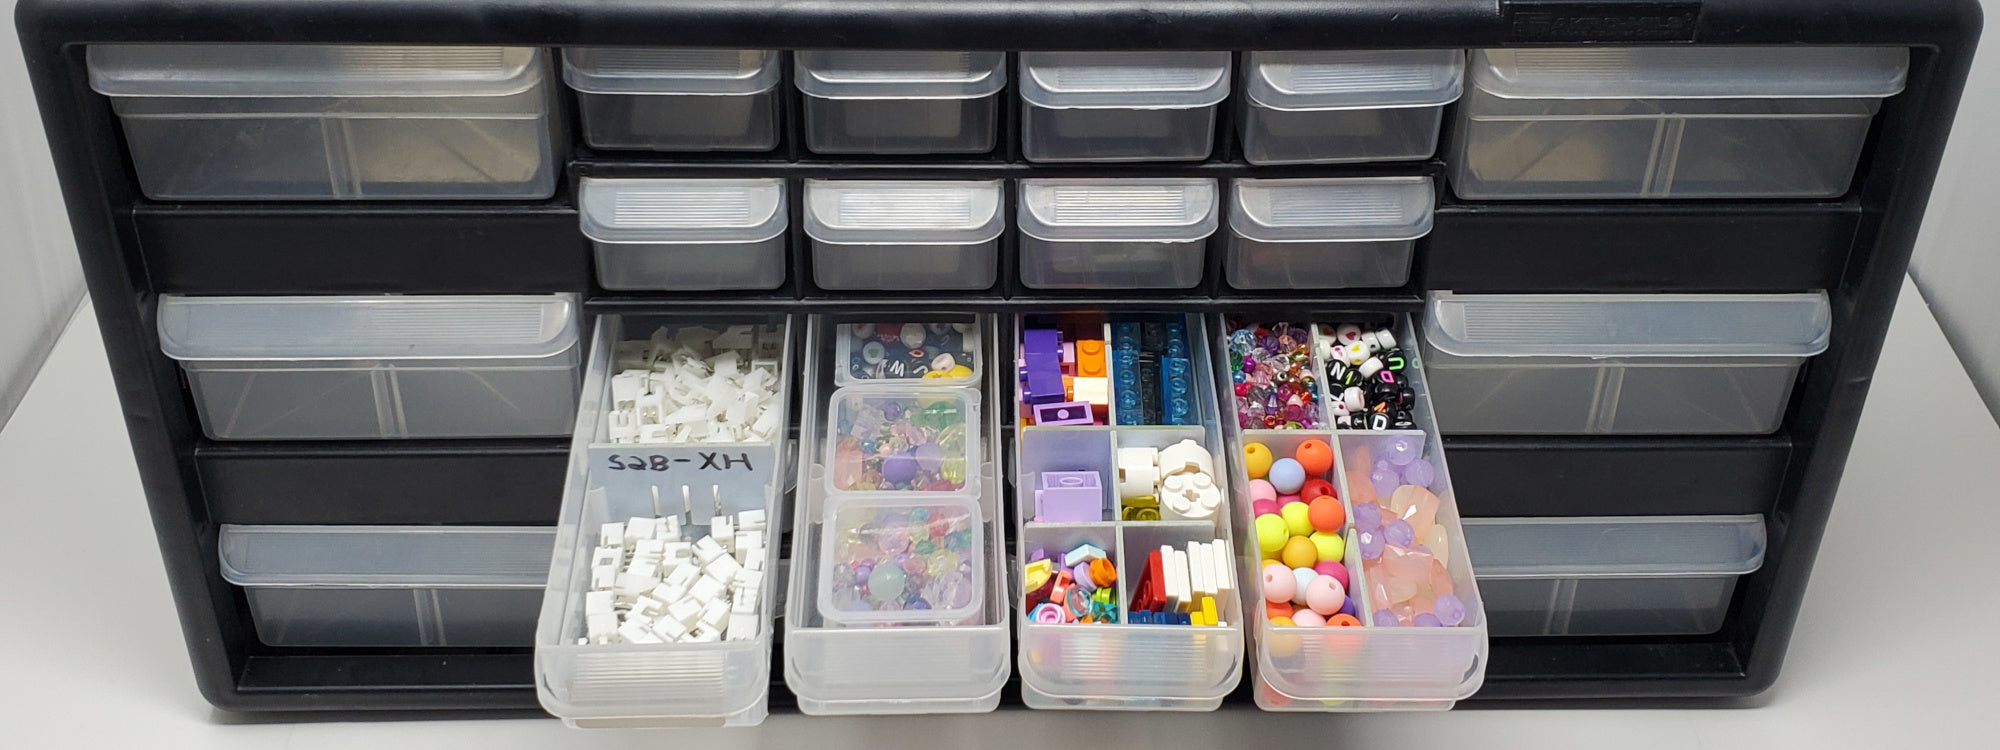 Bin Better - Configurable bin dividers and bin divider boxes in an Akro-Mils storage cabinet